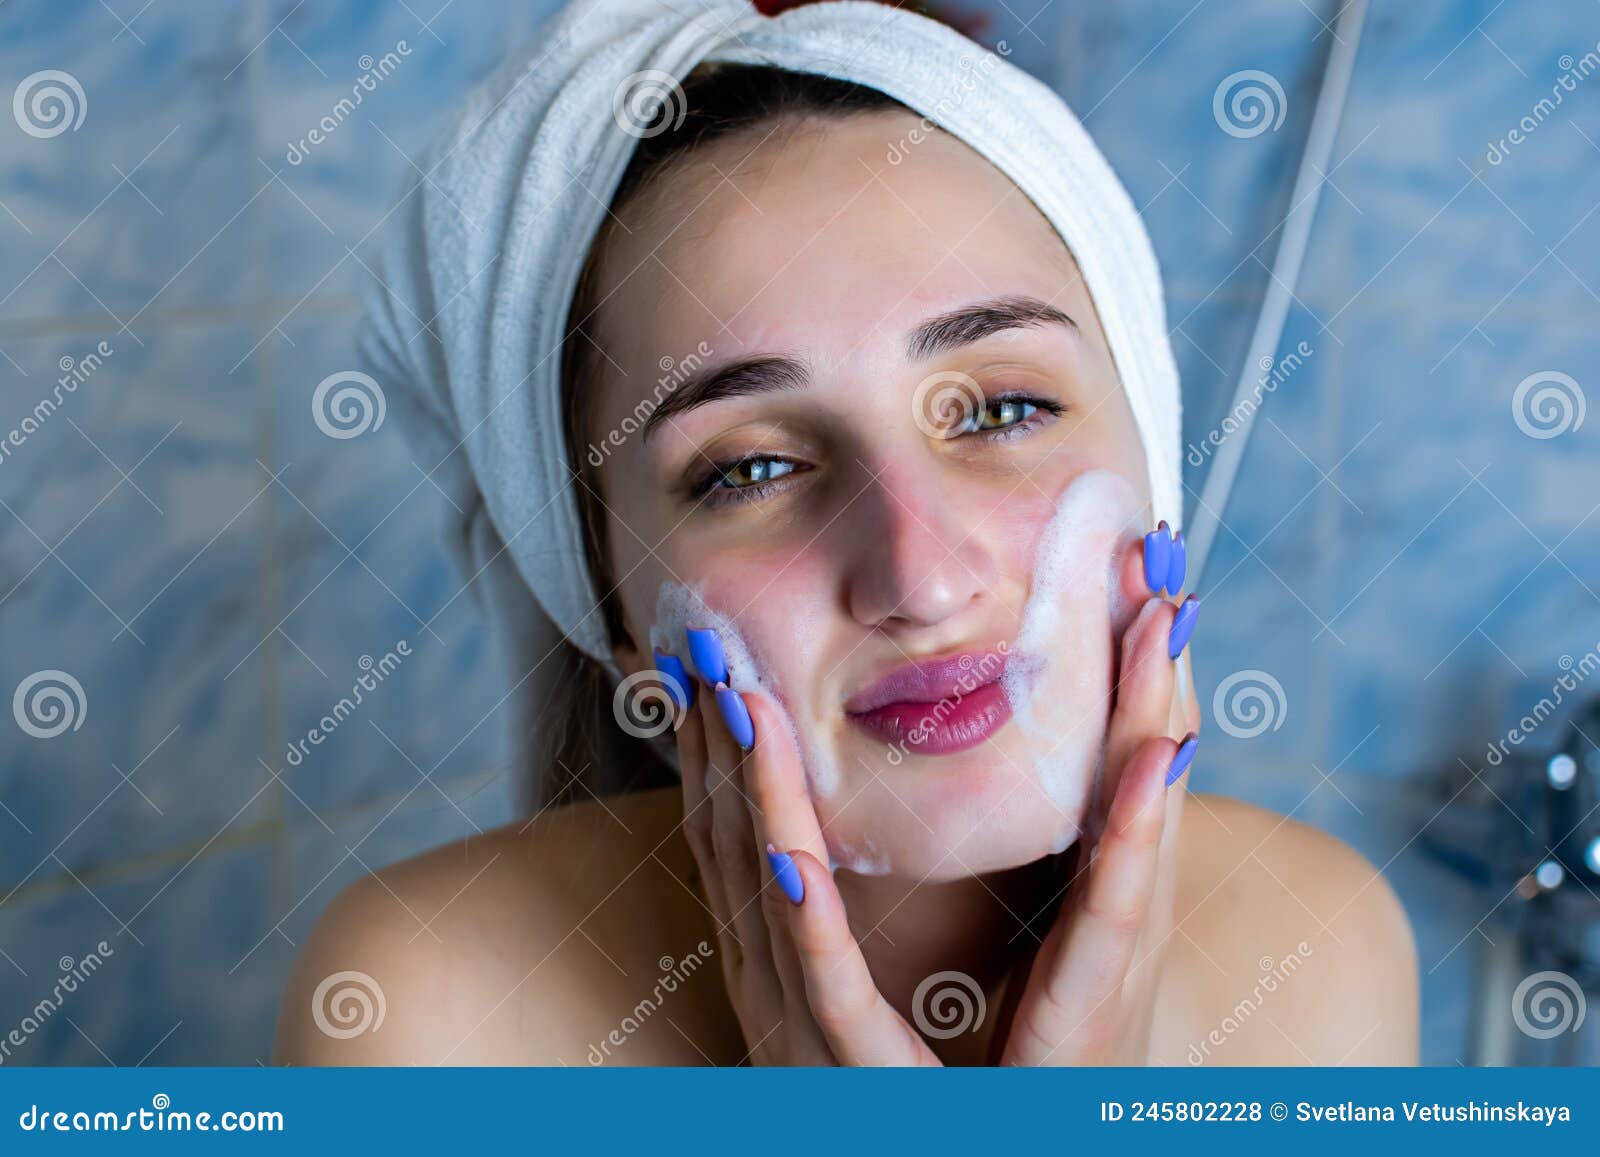 Close Up Portrait Of Smiling Brunette Girl Cleaning Her Cheeks With